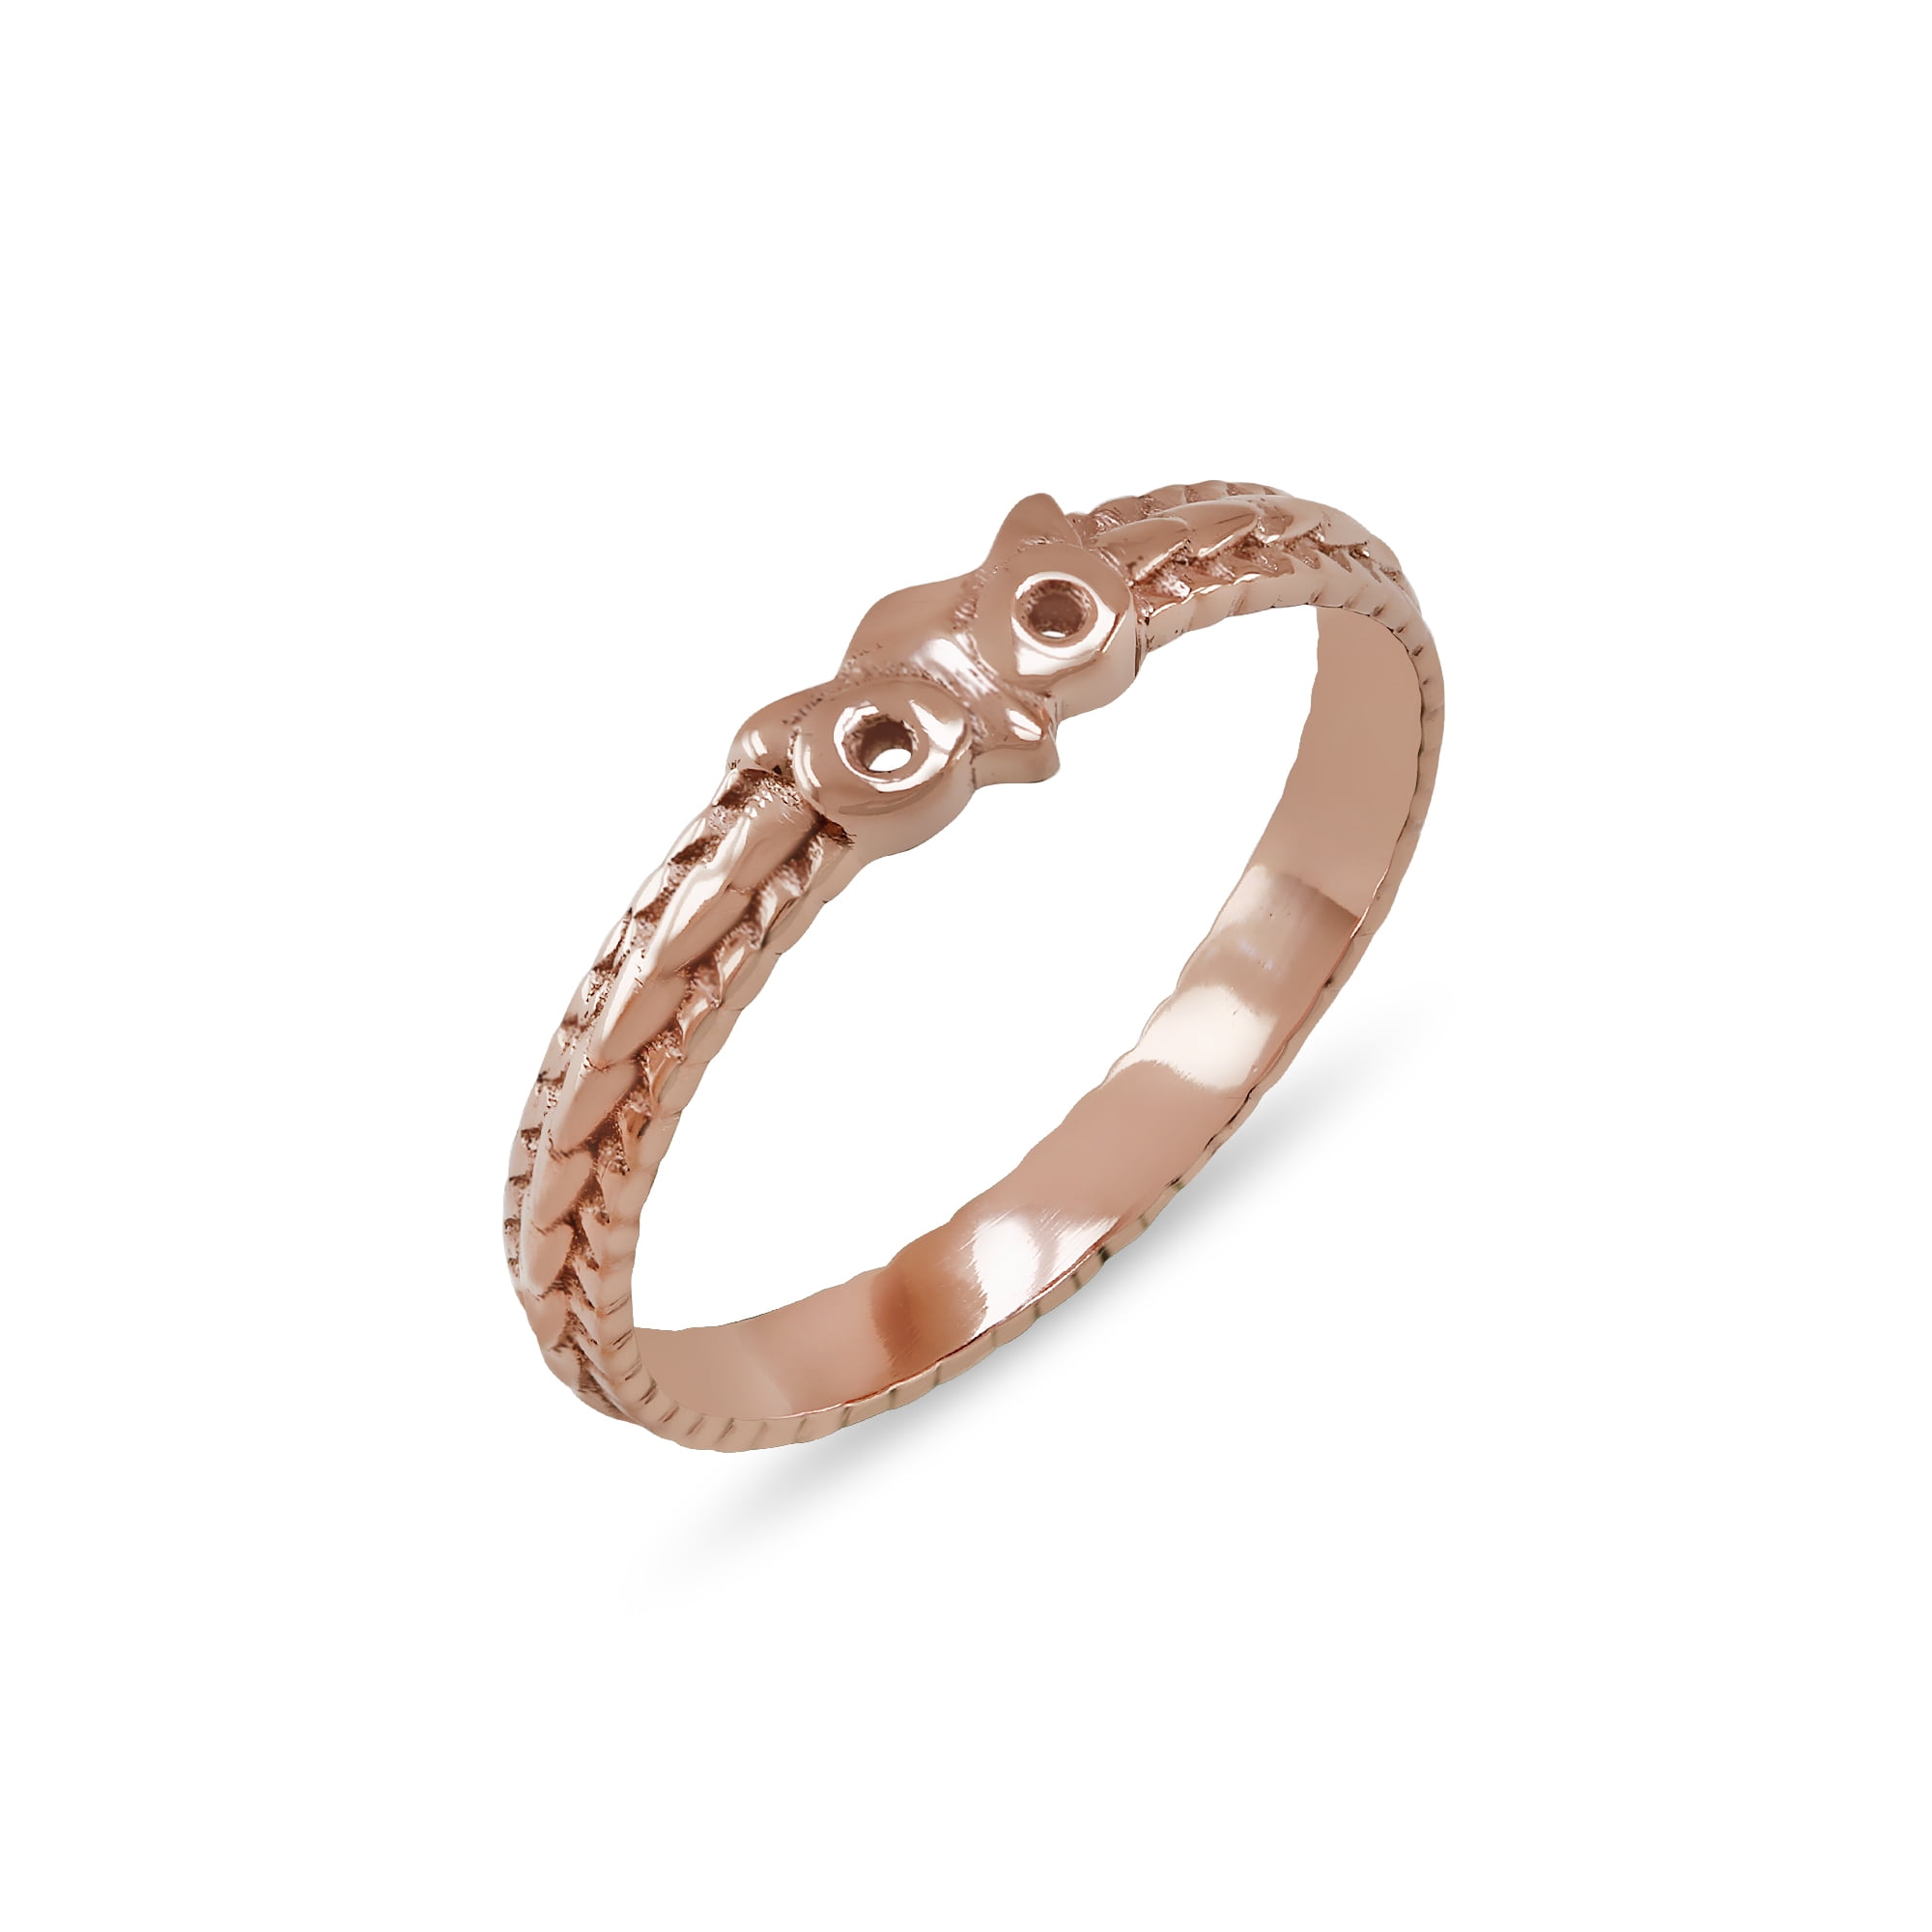 PalmBeach Jewelry 14k Yellow or Rose Gold-Plated or Platinum-Plated Braided  Puzzle Ring 